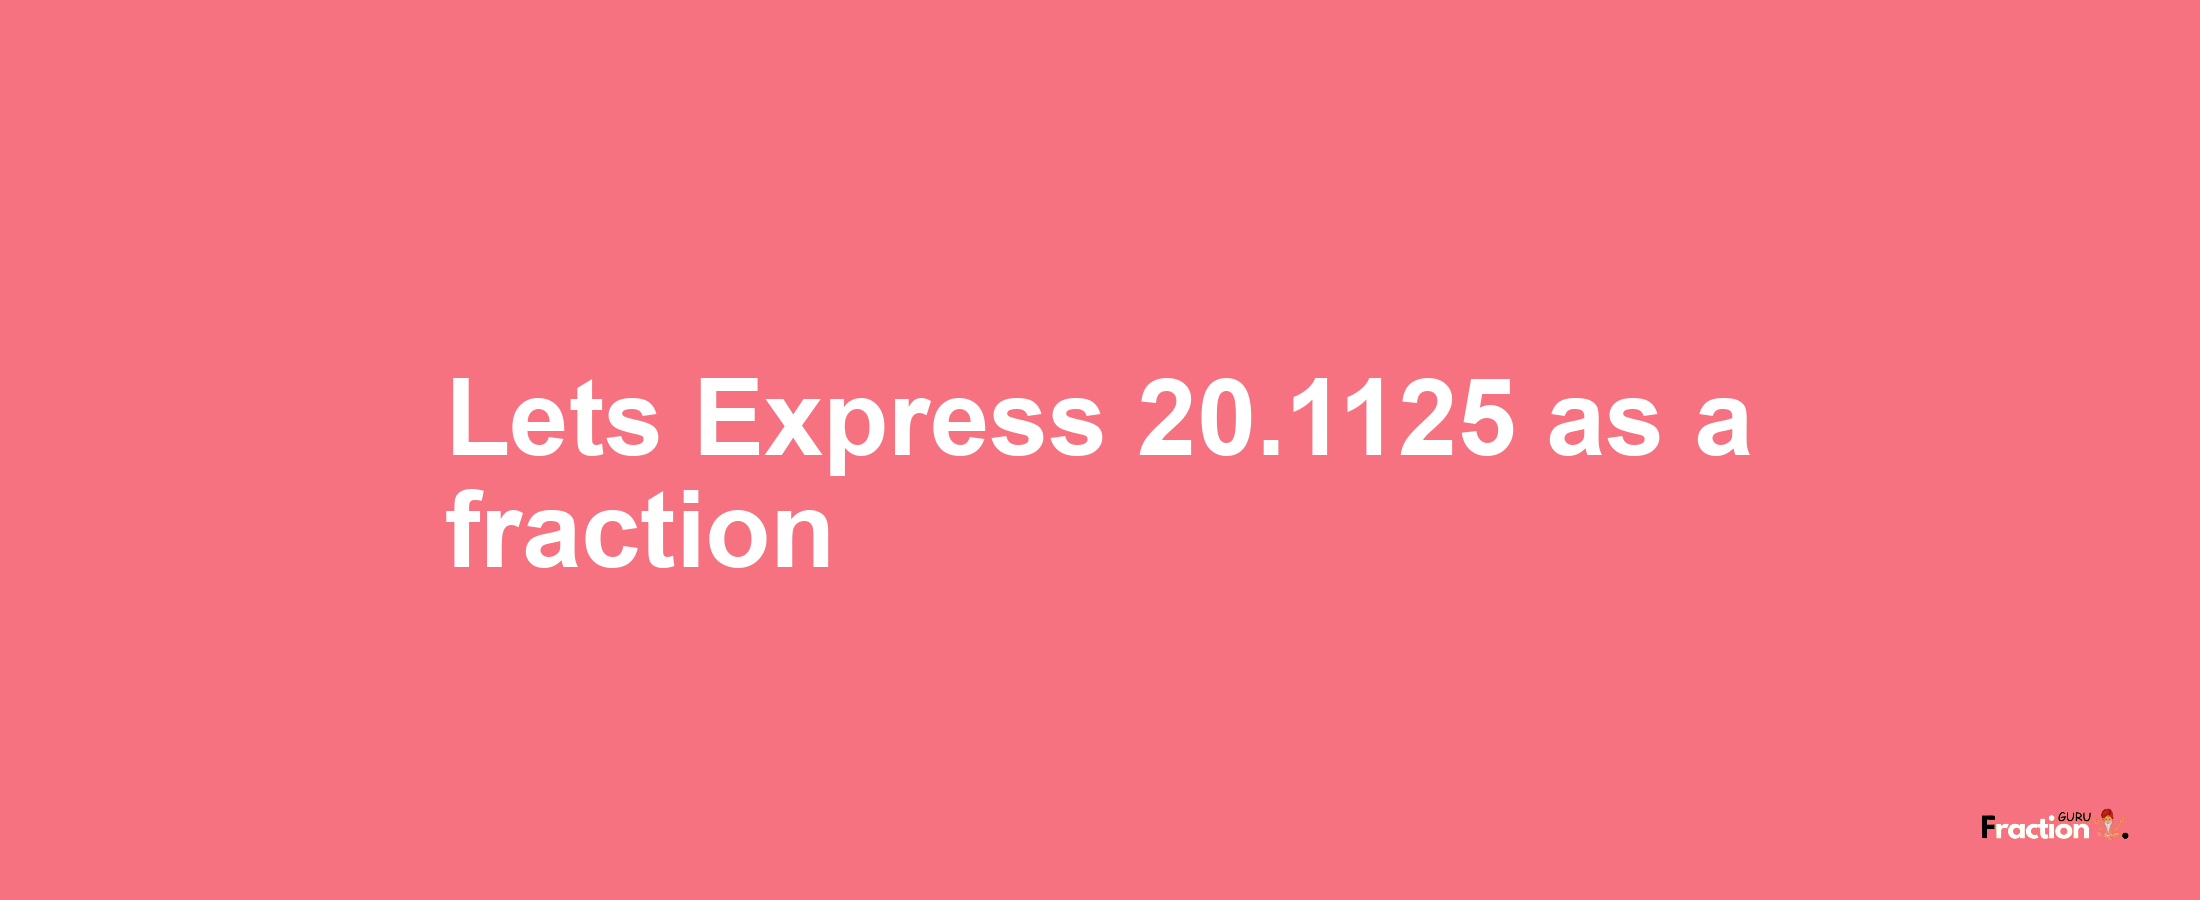 Lets Express 20.1125 as afraction